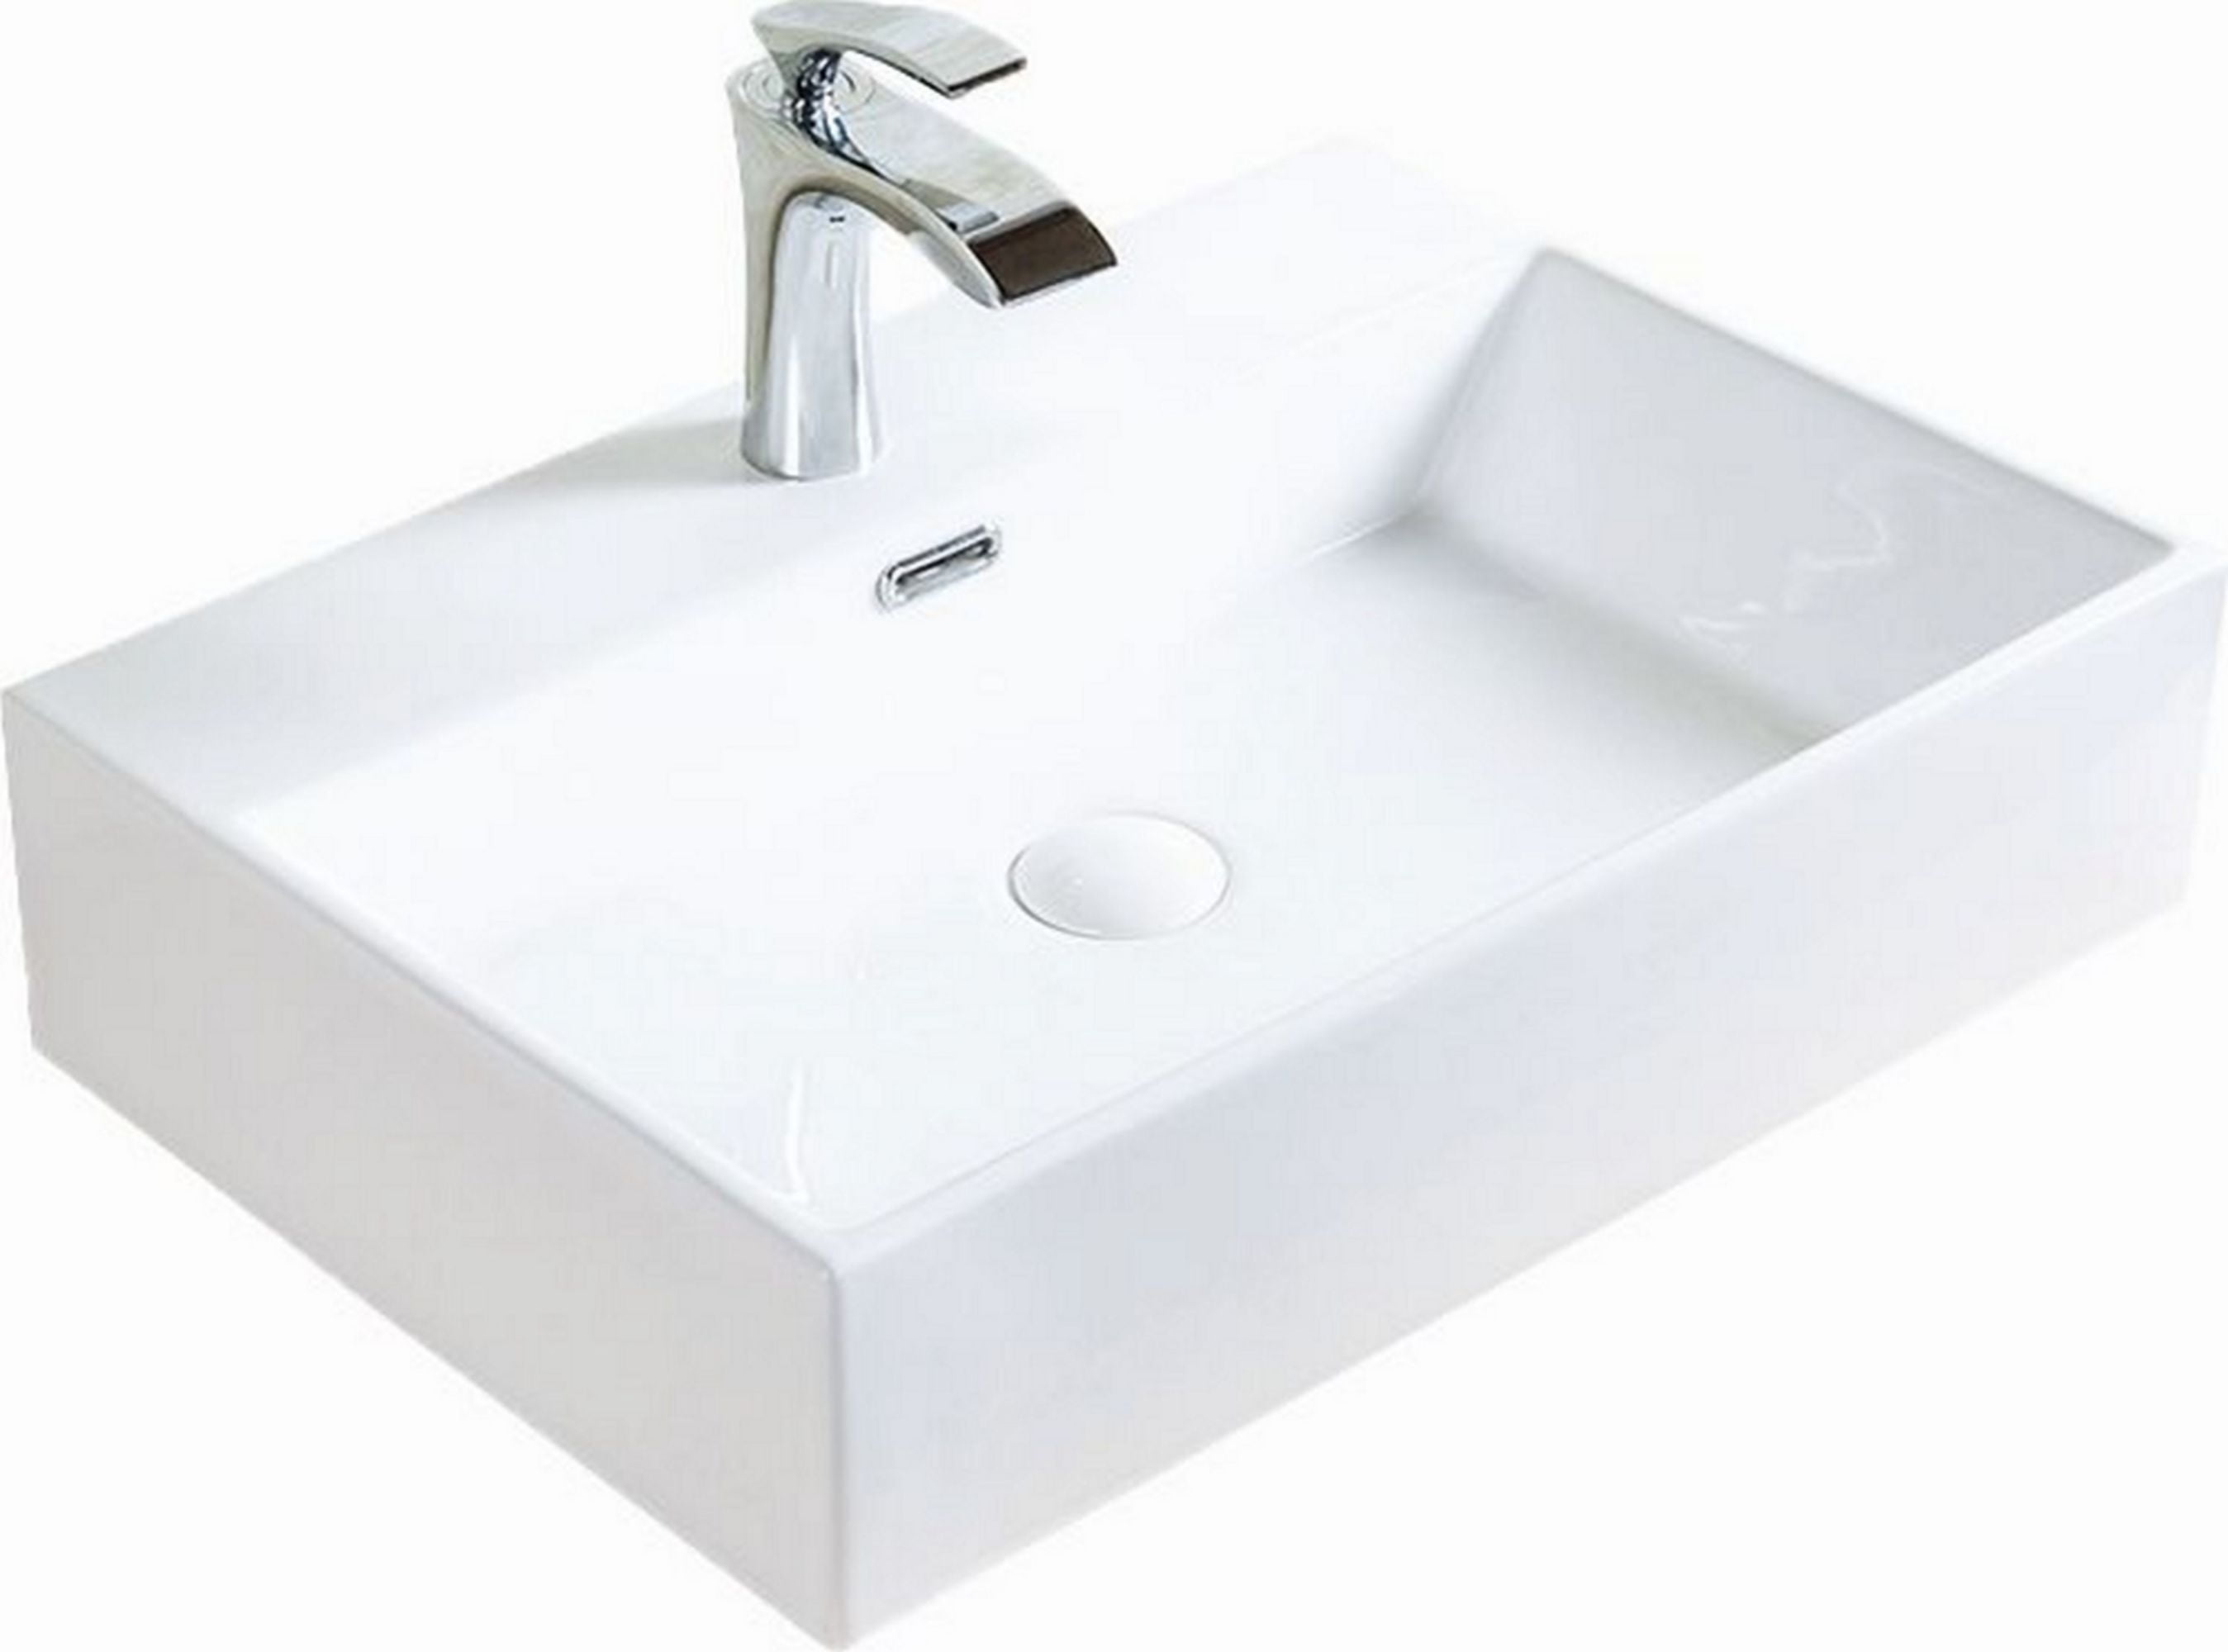 Ccb-381 Xander Over The Counter Vessel Ceramic Basin Sink, Glossy White - 23.62 X 16.56 X 5.68 In.